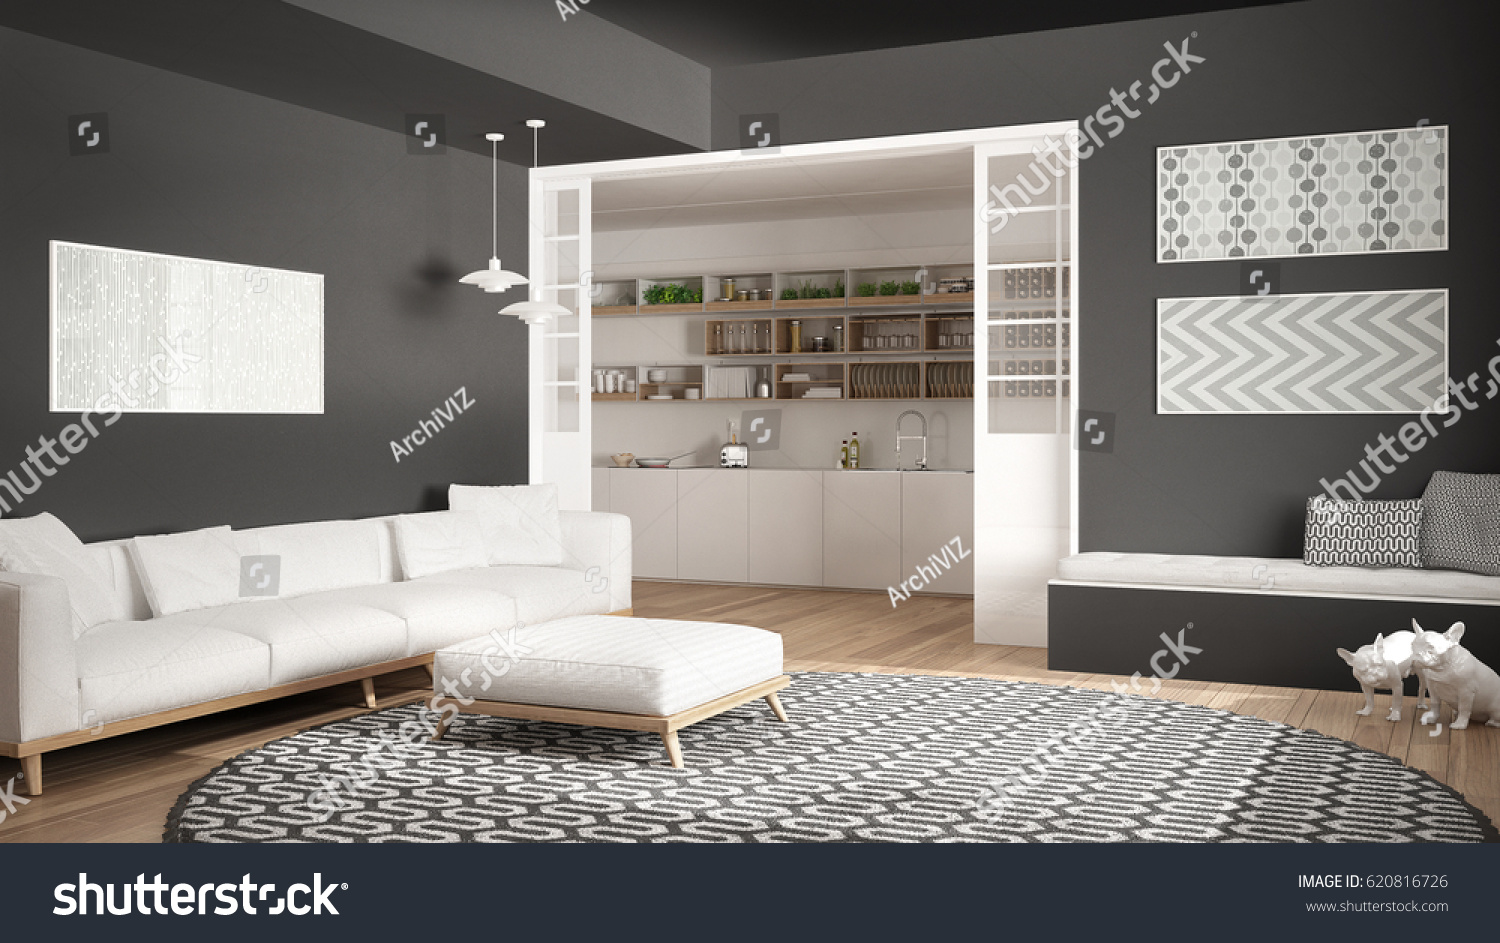 Minimalist living room with sofa, big round carpet and kitchen in the background, white and gray modern interior design, 3d illustration #620816726